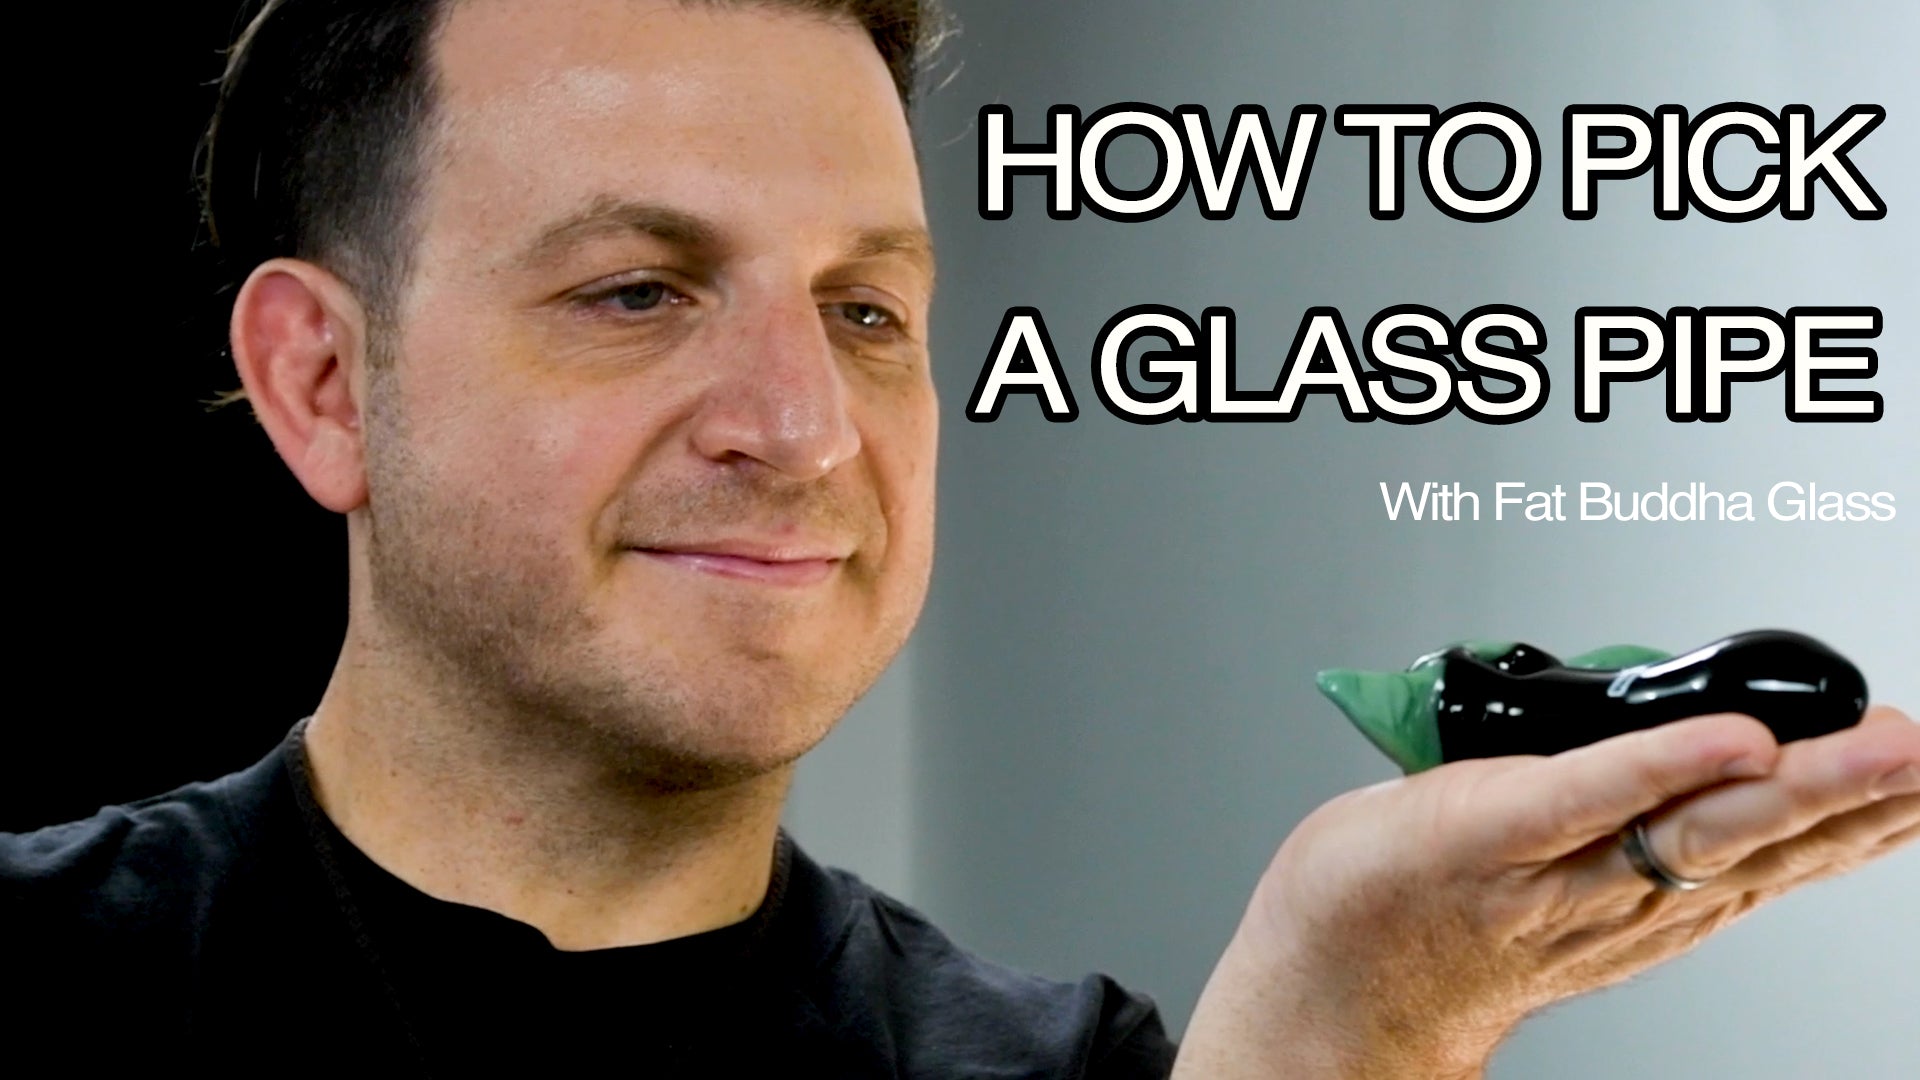 How To Pick A Glass Pipe With Fat Buddha Glass